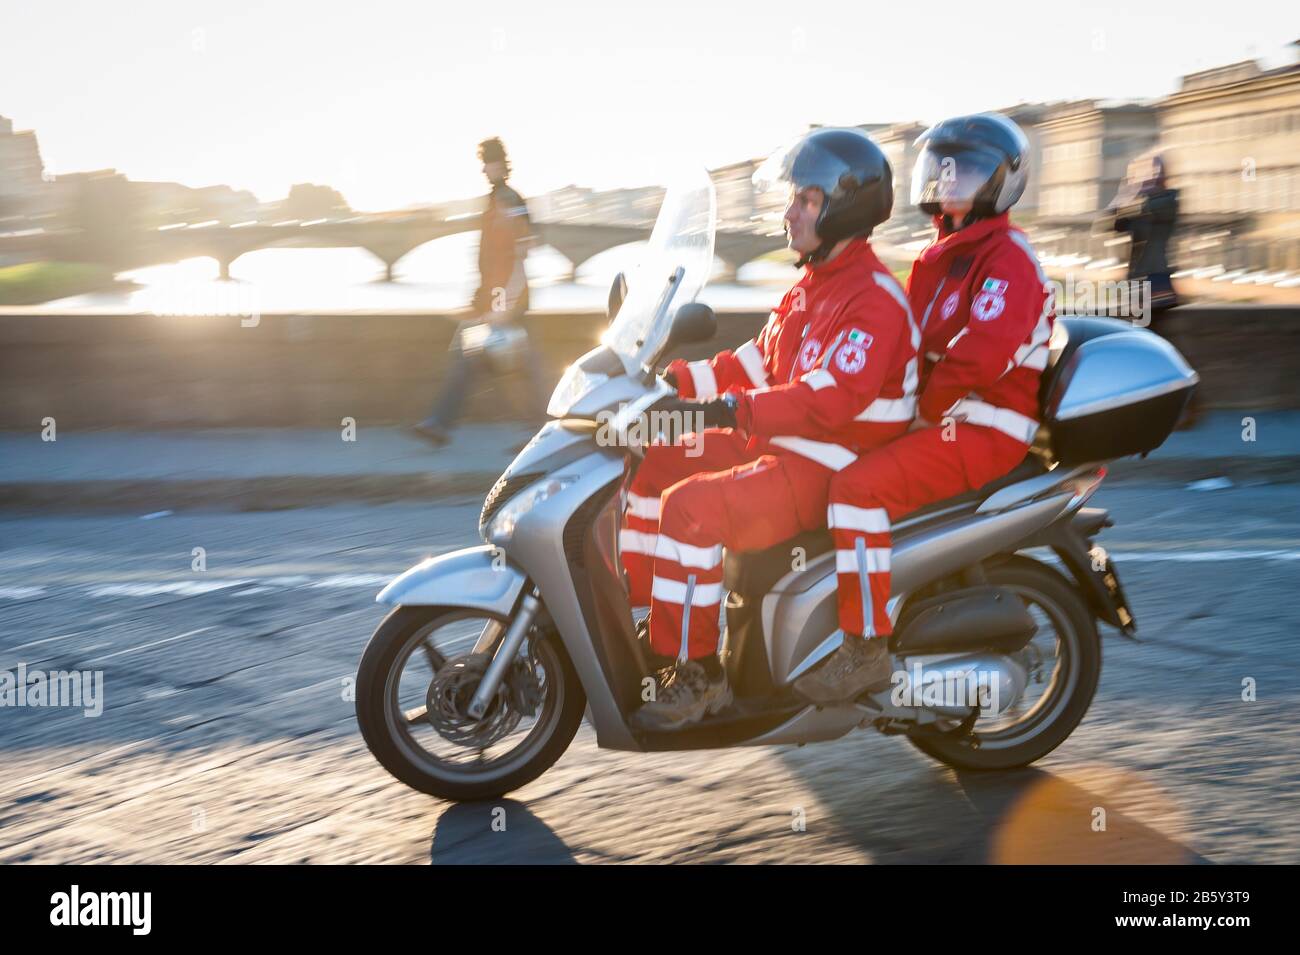 FLORENCE, ITALY - MAY 15, 2012: A pair of emergency response workers ride a scooter across the Arno River. Stock Photo